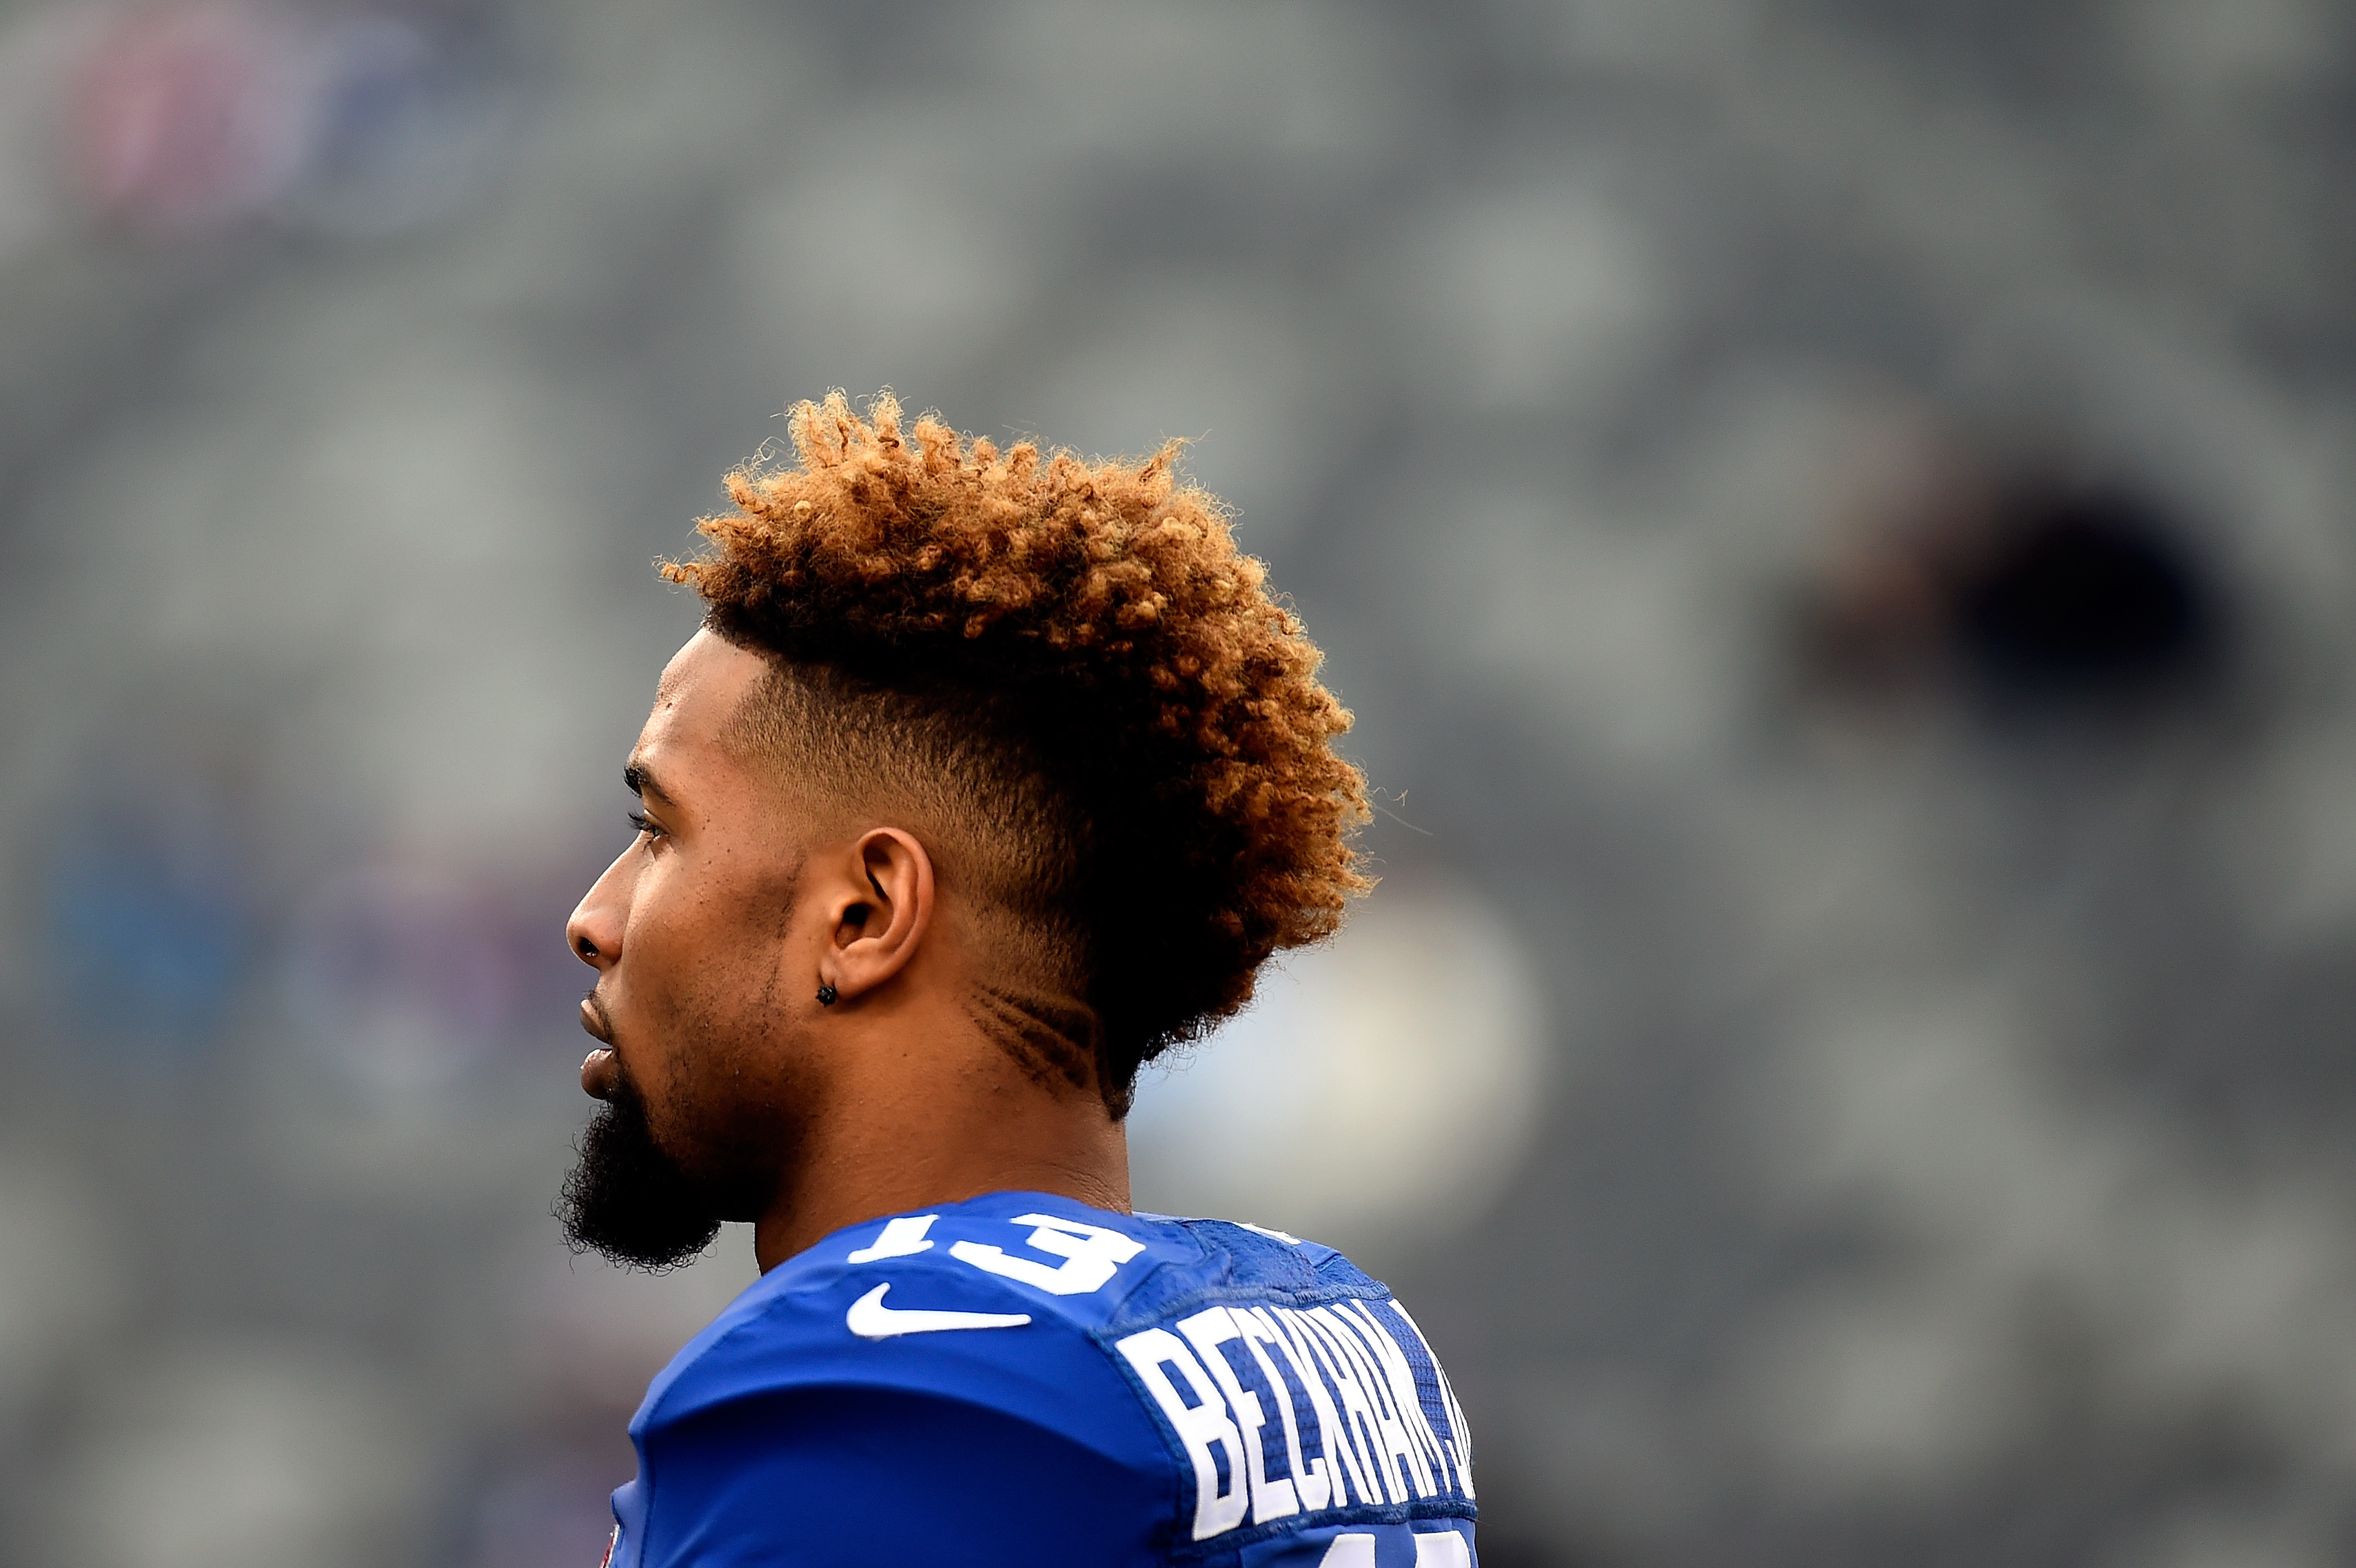 HD desktop wallpaper of a New York Giants player in blue jersey number 13, with the focus on his profile against a blurred stadium background.